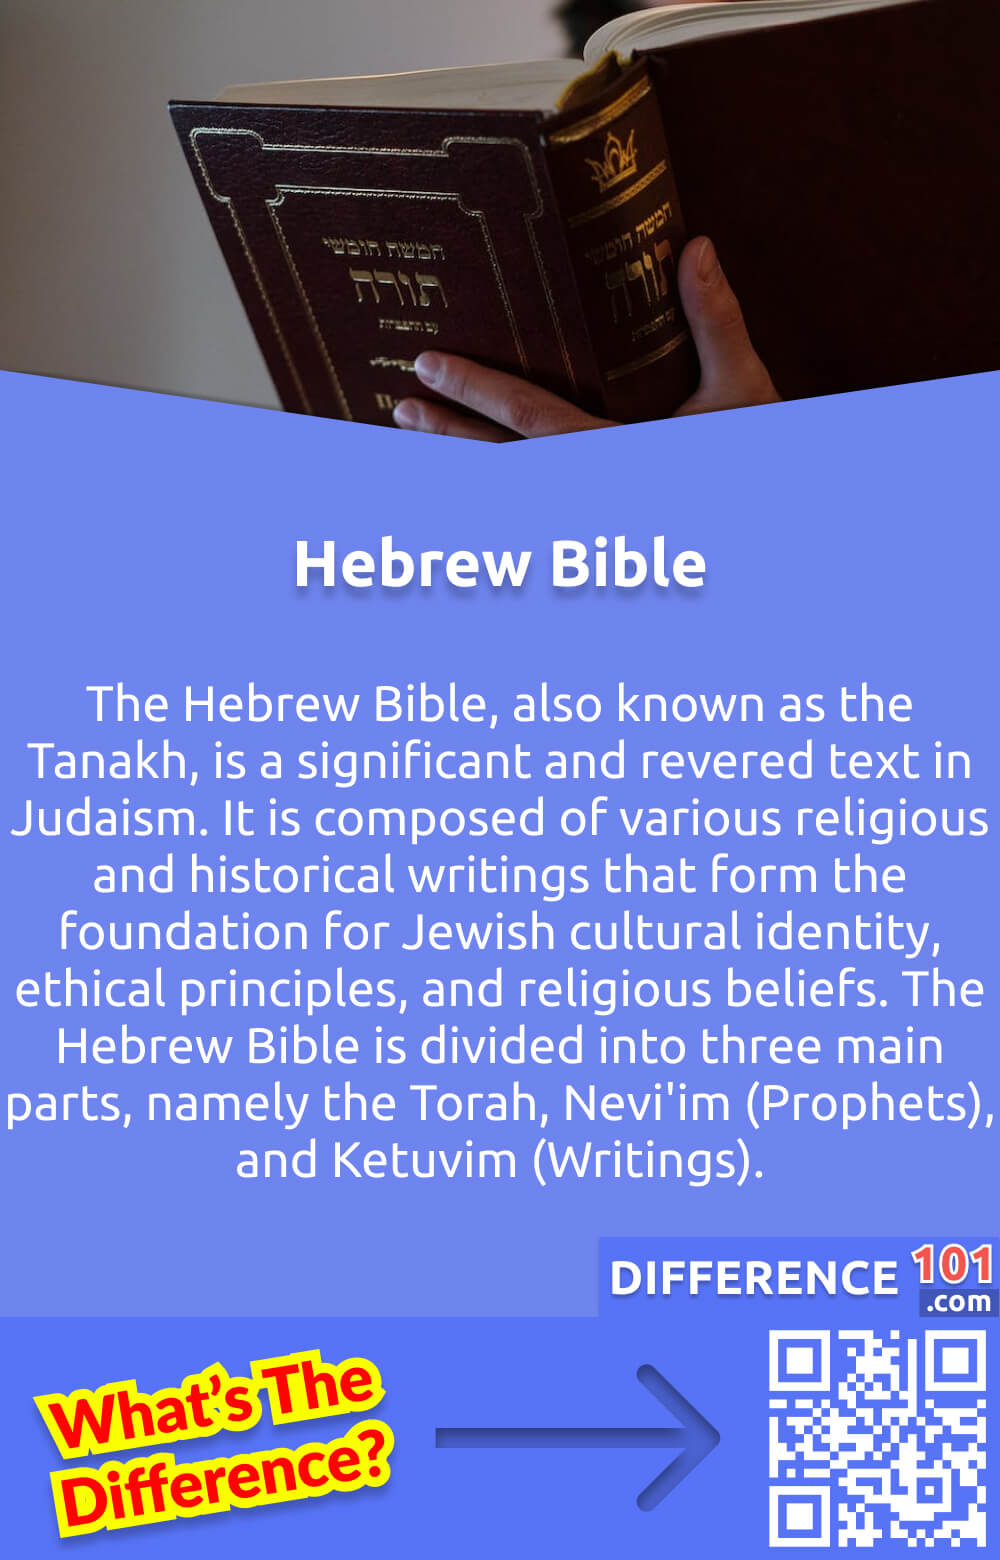 What Is Hebrew Bible? The Hebrew Bible, also known as the Tanakh, is a significant and revered text in Judaism. It is composed of various religious and historical writings that form the foundation for Jewish cultural identity, ethical principles, and religious beliefs. The Hebrew Bible is divided into three main parts, namely the Torah, Nevi'im (Prophets), and Ketuvim (Writings). The Torah contains the five books of Moses that outline Jewish laws and teachings, while the Nevi'im comprises the writings of the prophets who conveyed God's messages to the Jewish people. The Ketuvim contains various religious and historical writings such as Psalms, Proverbs, and the Book of Job. The Hebrew Bible is a central aspect of Jewish tradition and continues to shape Jewish life and beliefs today.